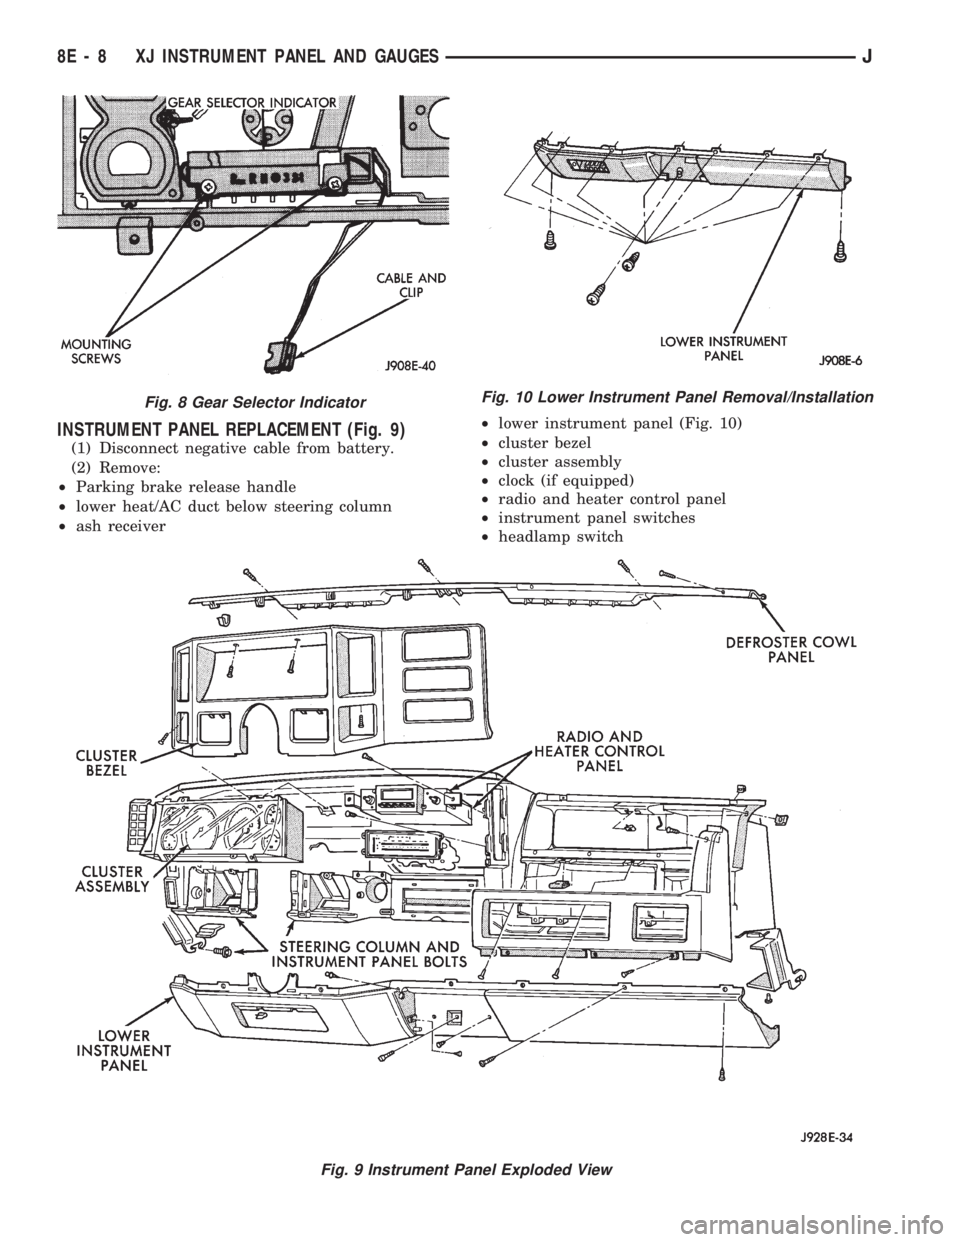 JEEP CHEROKEE 1994  Service Repair Manual INSTRUMENT PANEL REPLACEMENT (Fig. 9)
(1) Disconnect negative cable from battery.
(2) Remove:
²Parking brake release handle
²lower heat/AC duct below steering column
²ash receiver²lower instrument